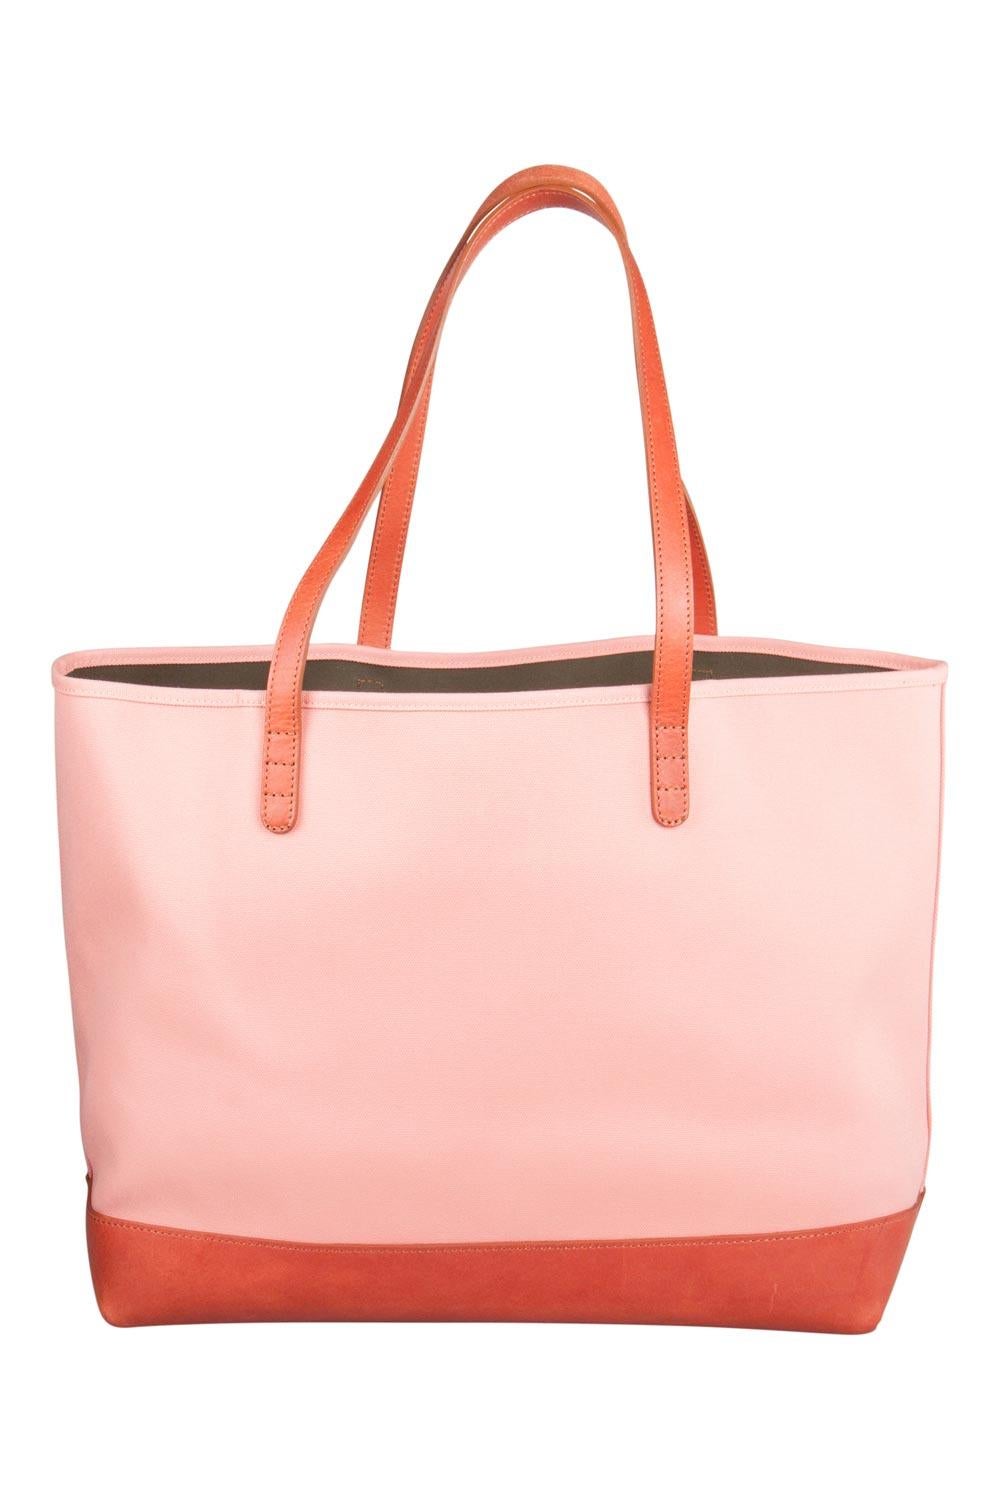 The tote from Mansur Gavriel is a timeless piece. The bag is crafted from canvas and leather and flaunts a combination of warm hues. It features double top handles. The bag opens to reveal a spacious interior with a zipped pouch and enough space to